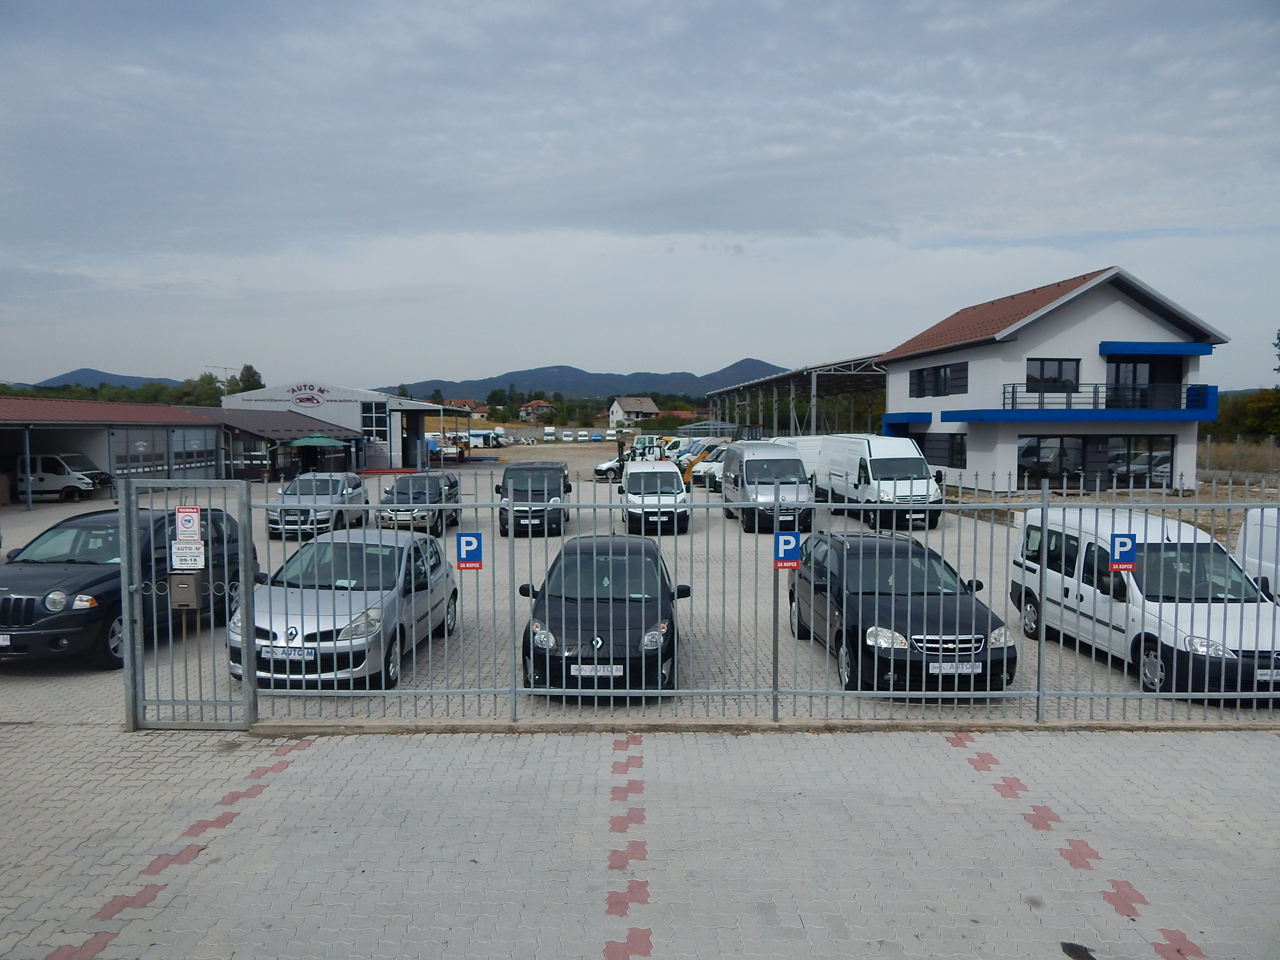 USED CARS AUTO M Second hand car shops Cacak - Photo 1